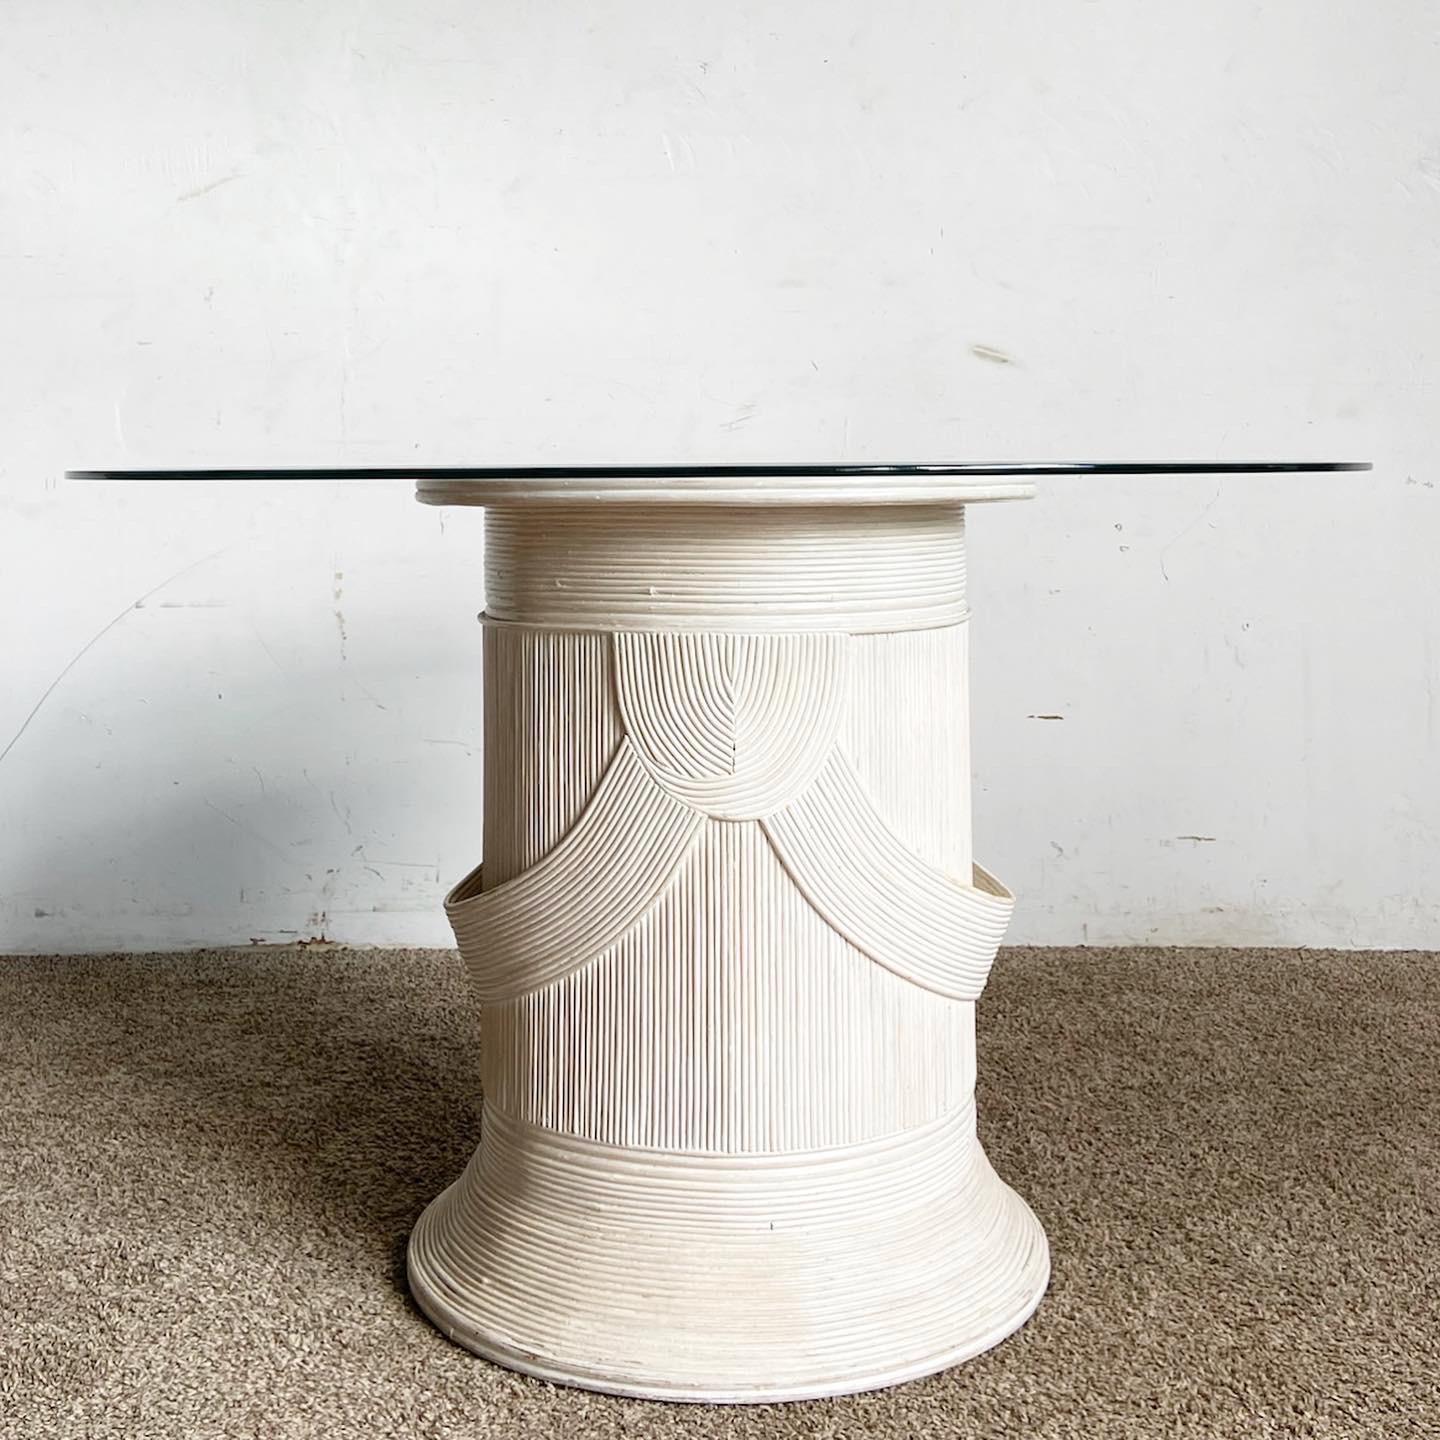 Elevate your dining experience with this Boho Chic Pencil Reed Pedestal Circular Glass Top Dining Table. Featuring an intricately crafted pencil reed base and a transparent glass top, this table is a unique blend of natural textures and modern